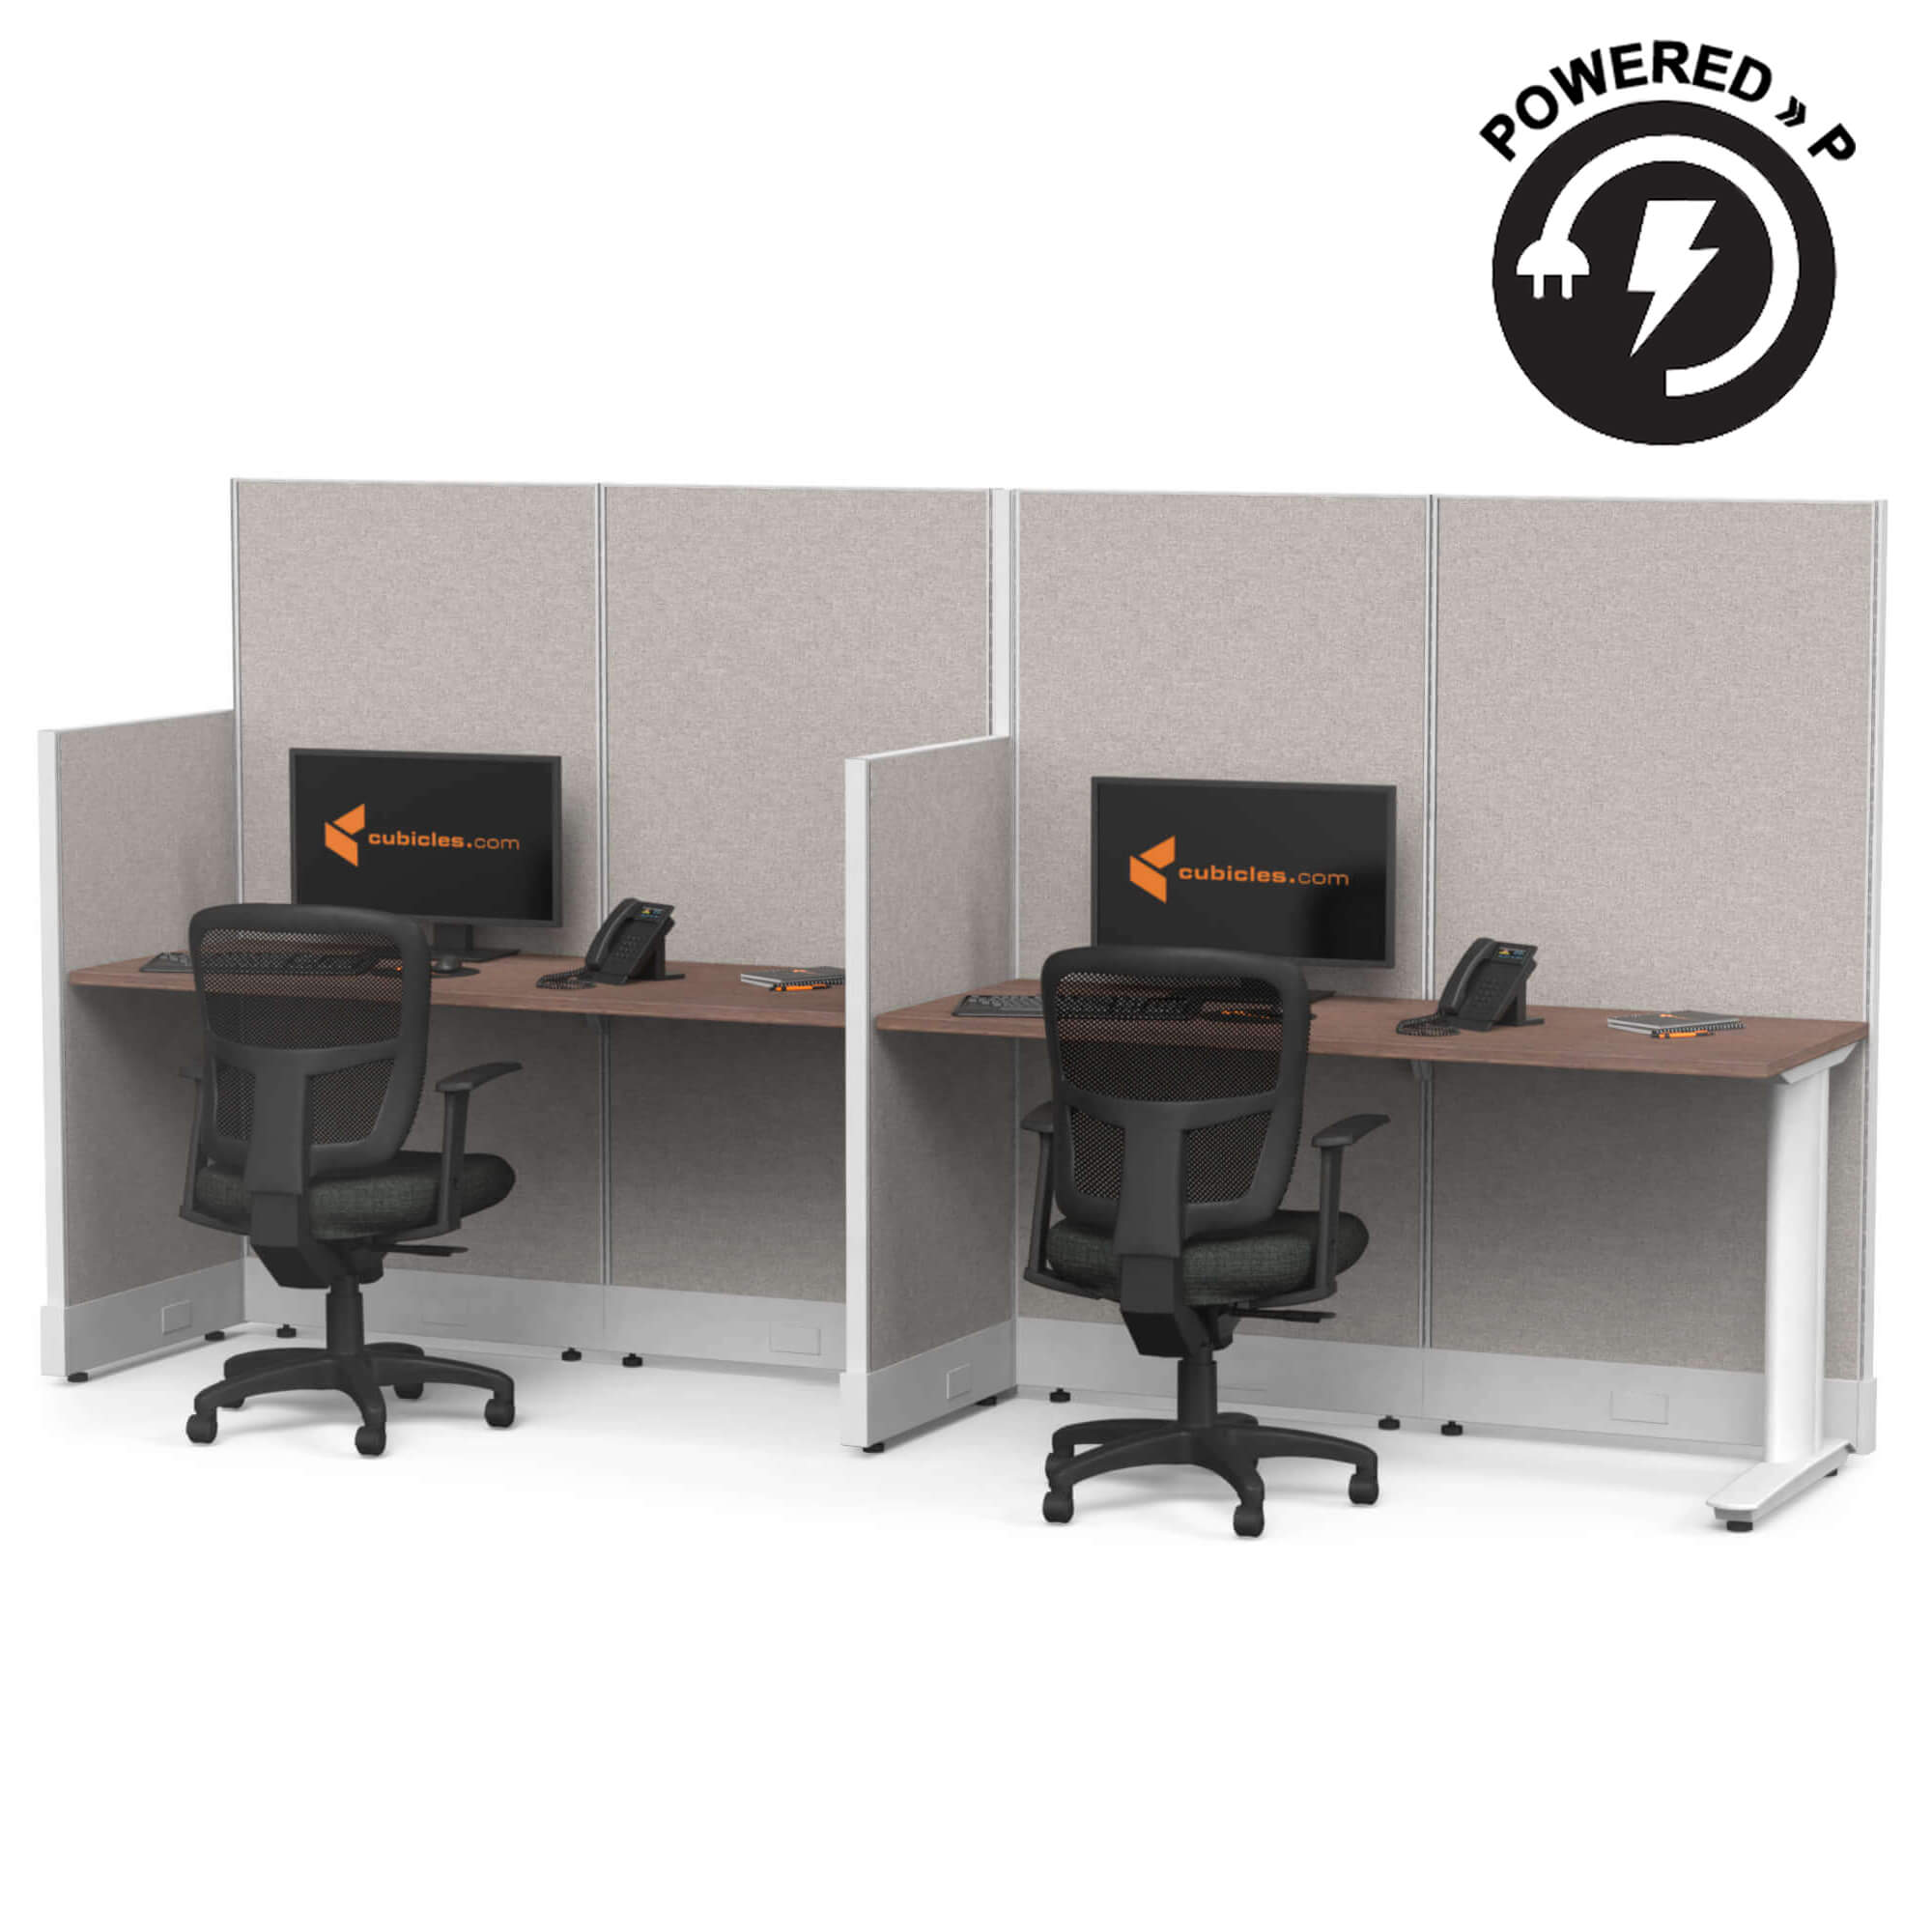 Cubicle desk straight 2pack powered sign